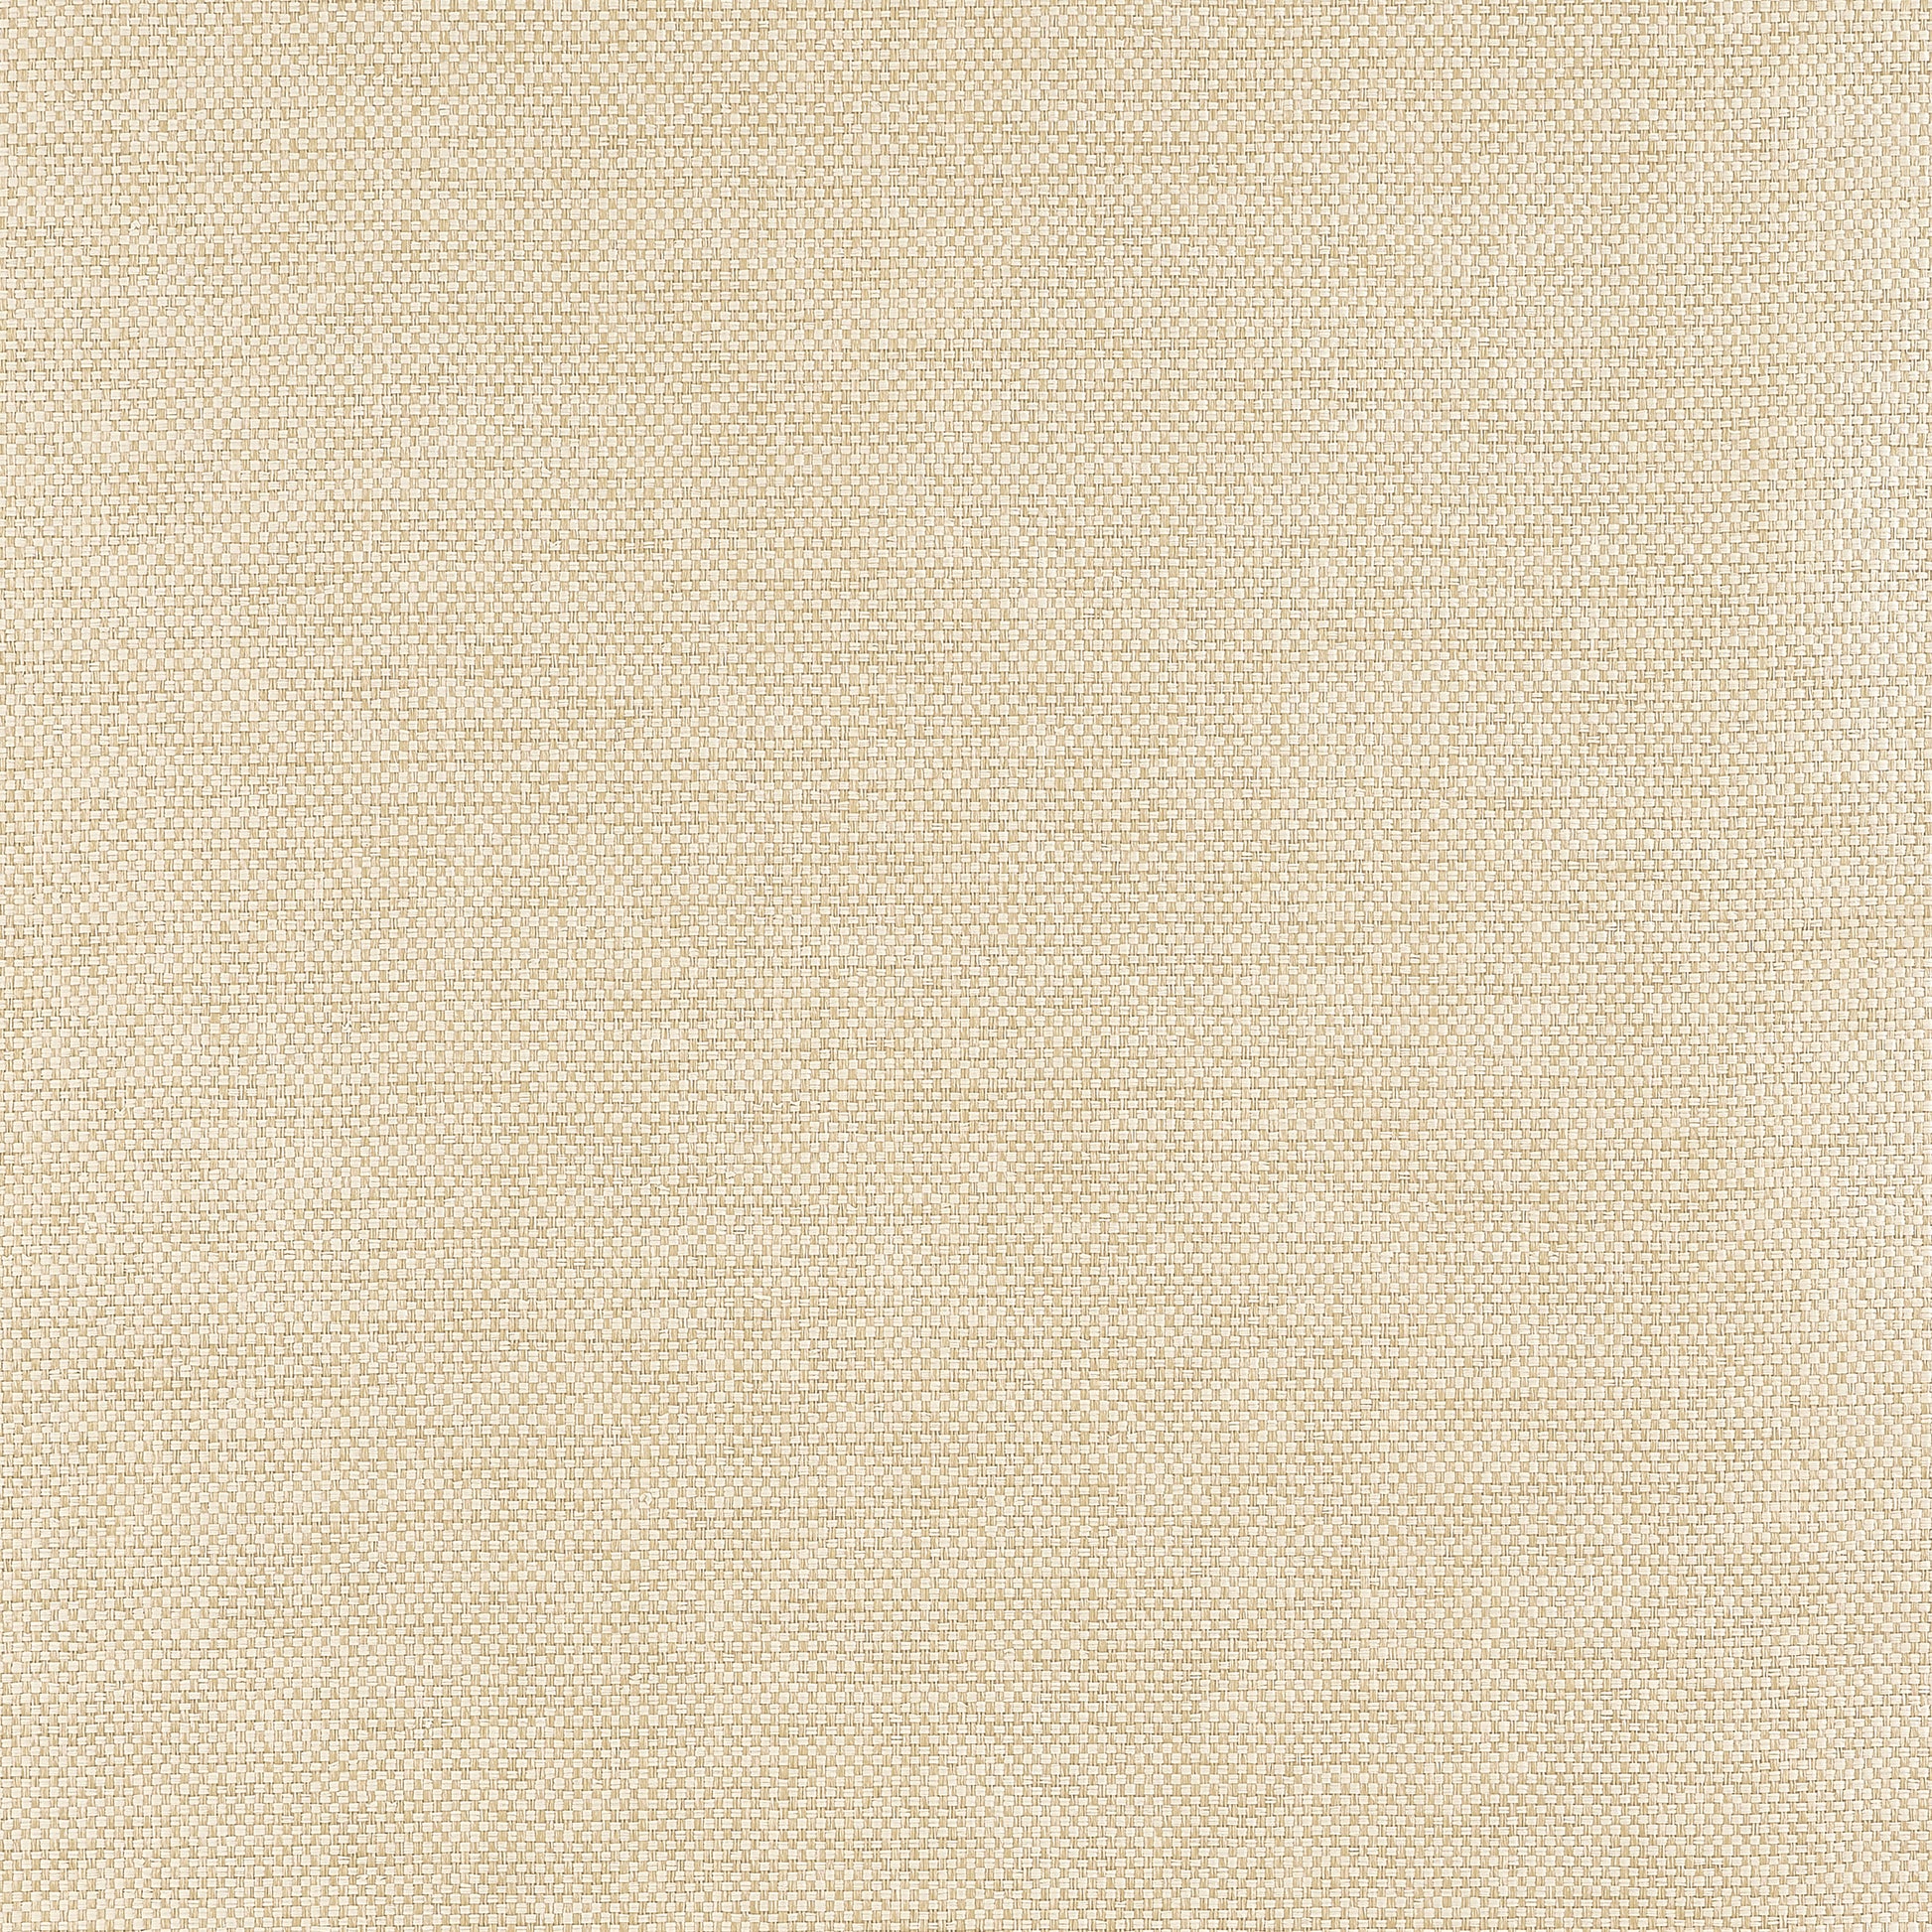 Purchase Thibaut Wallpaper Product# T19682 pattern name Clarkson Weave color Wheat. 